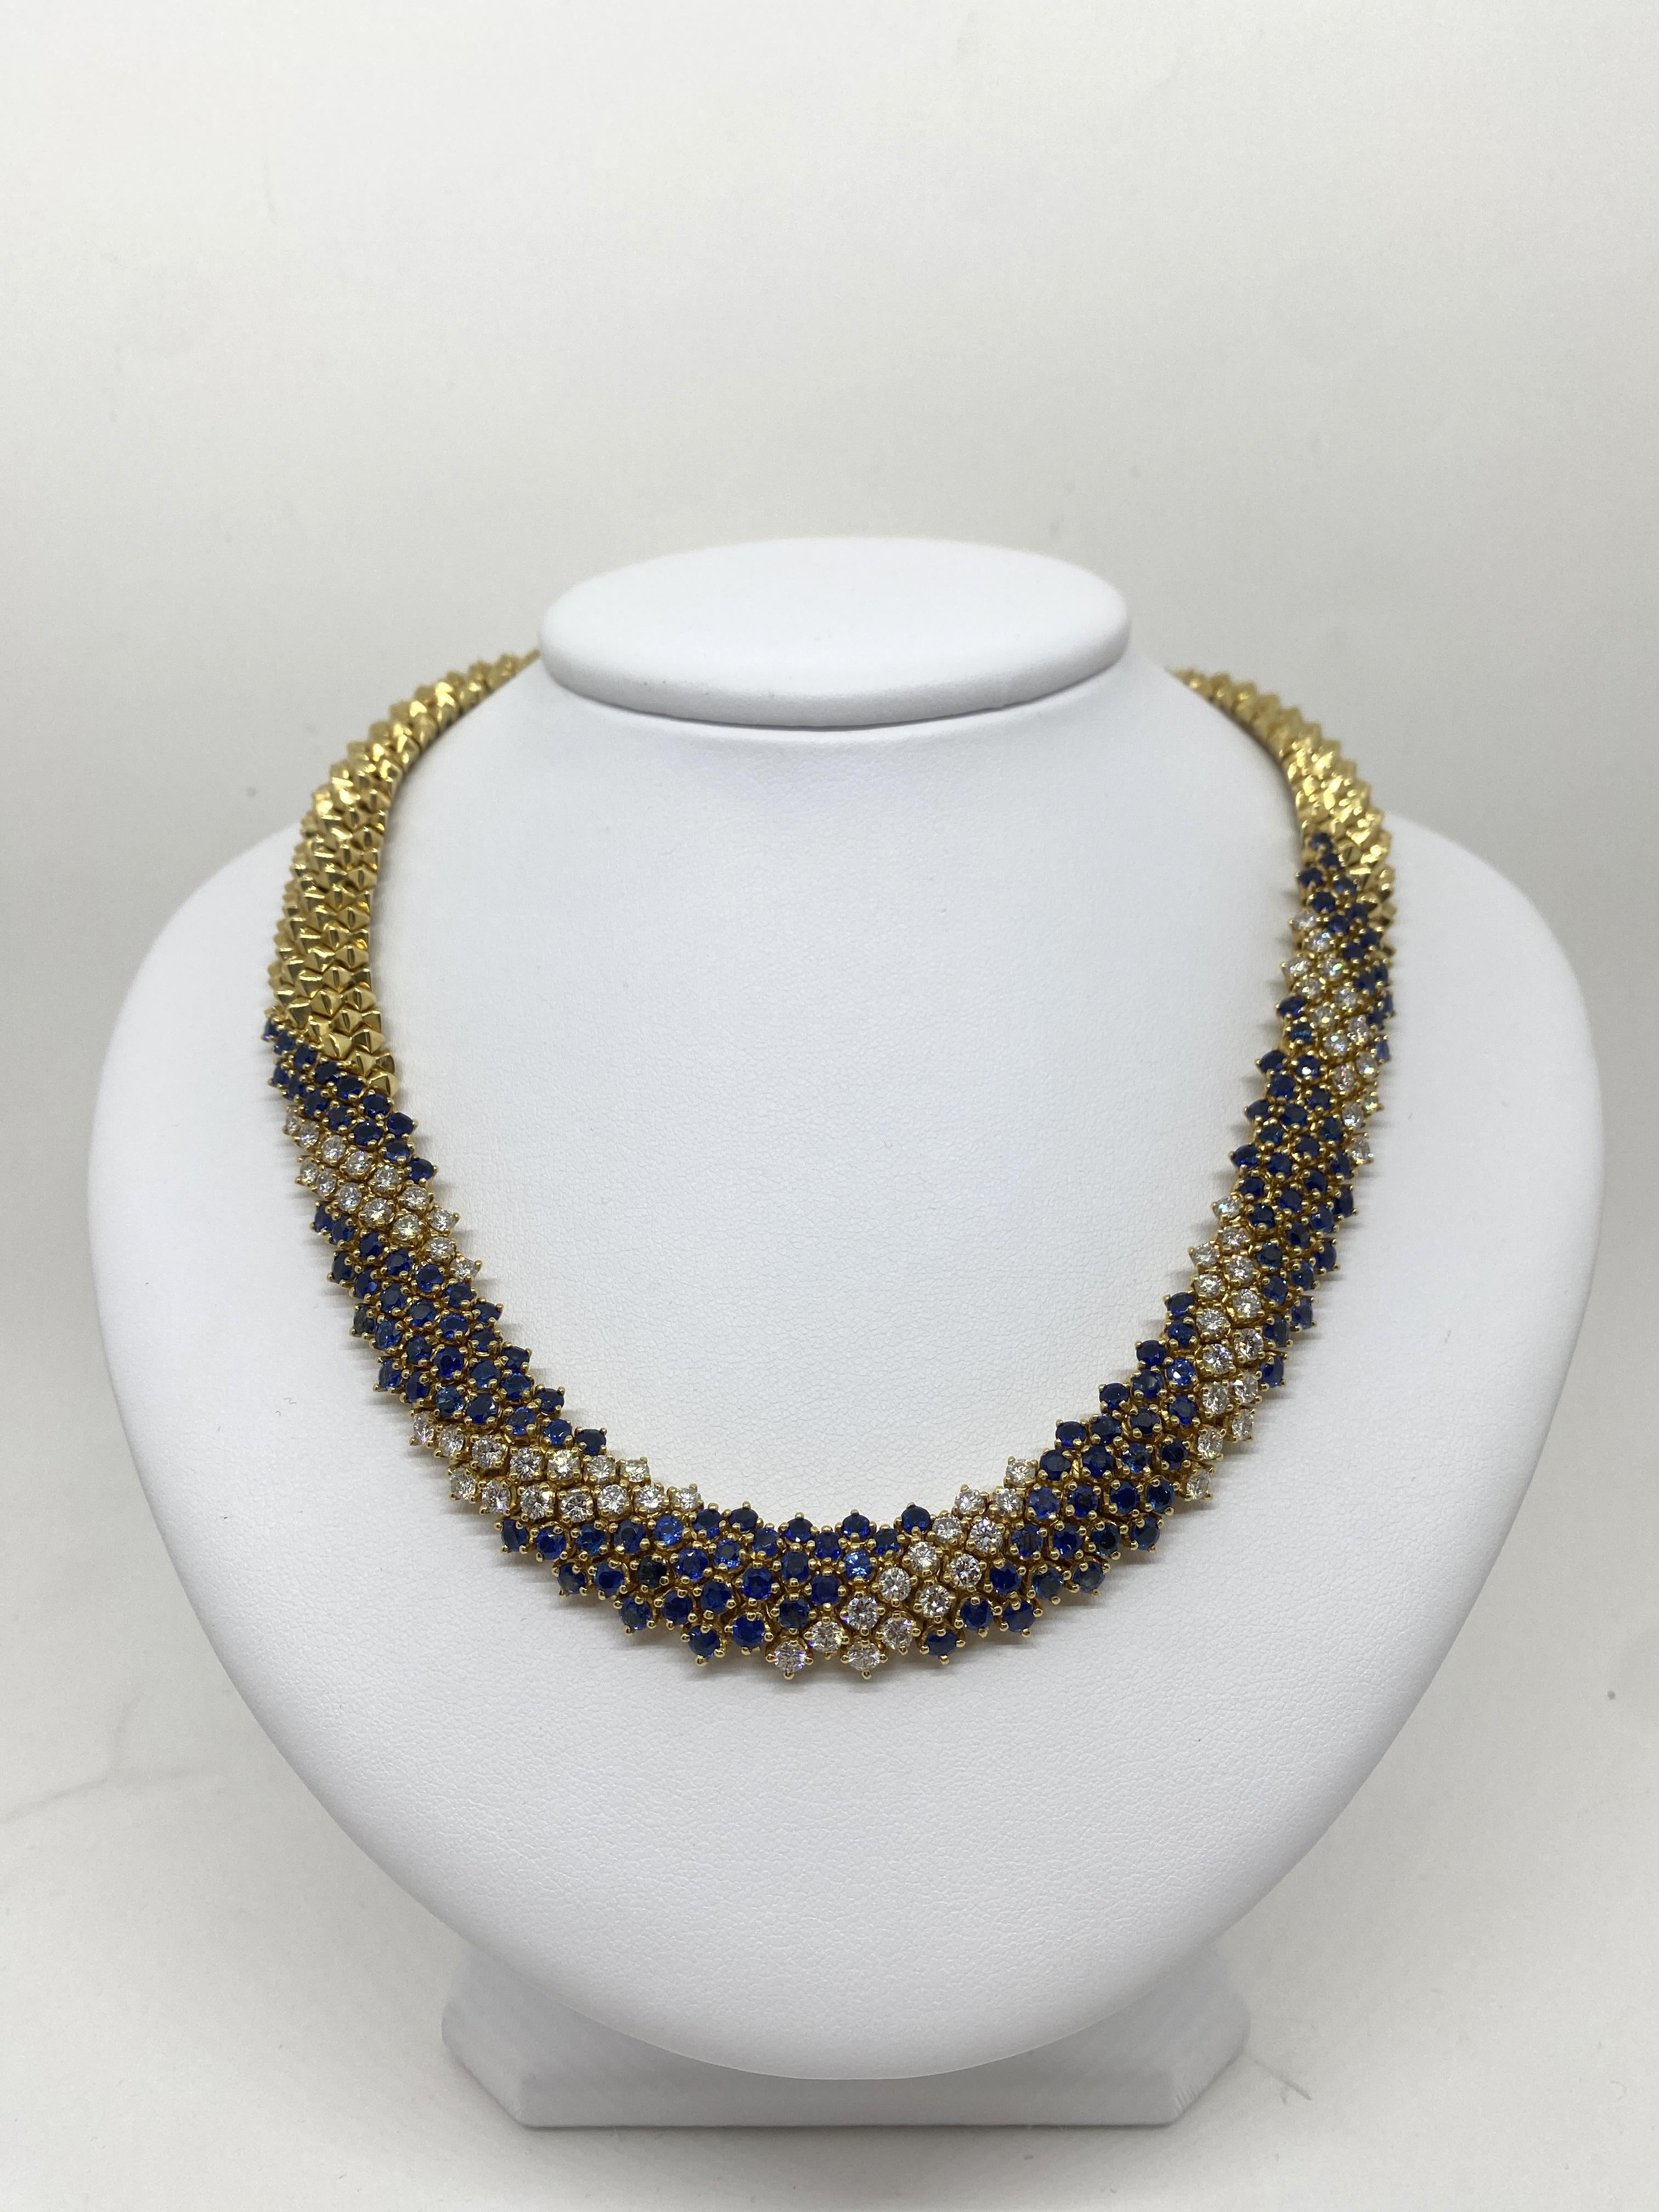 Necklace made of 18kt yellow gold with natural brilliant-cut diamonds for ct 7.42 and natural blue sapphires for ct 23

Welcome to our jewelry collection, where every piece tells a story of timeless elegance and unparalleled craftsmanship. As a